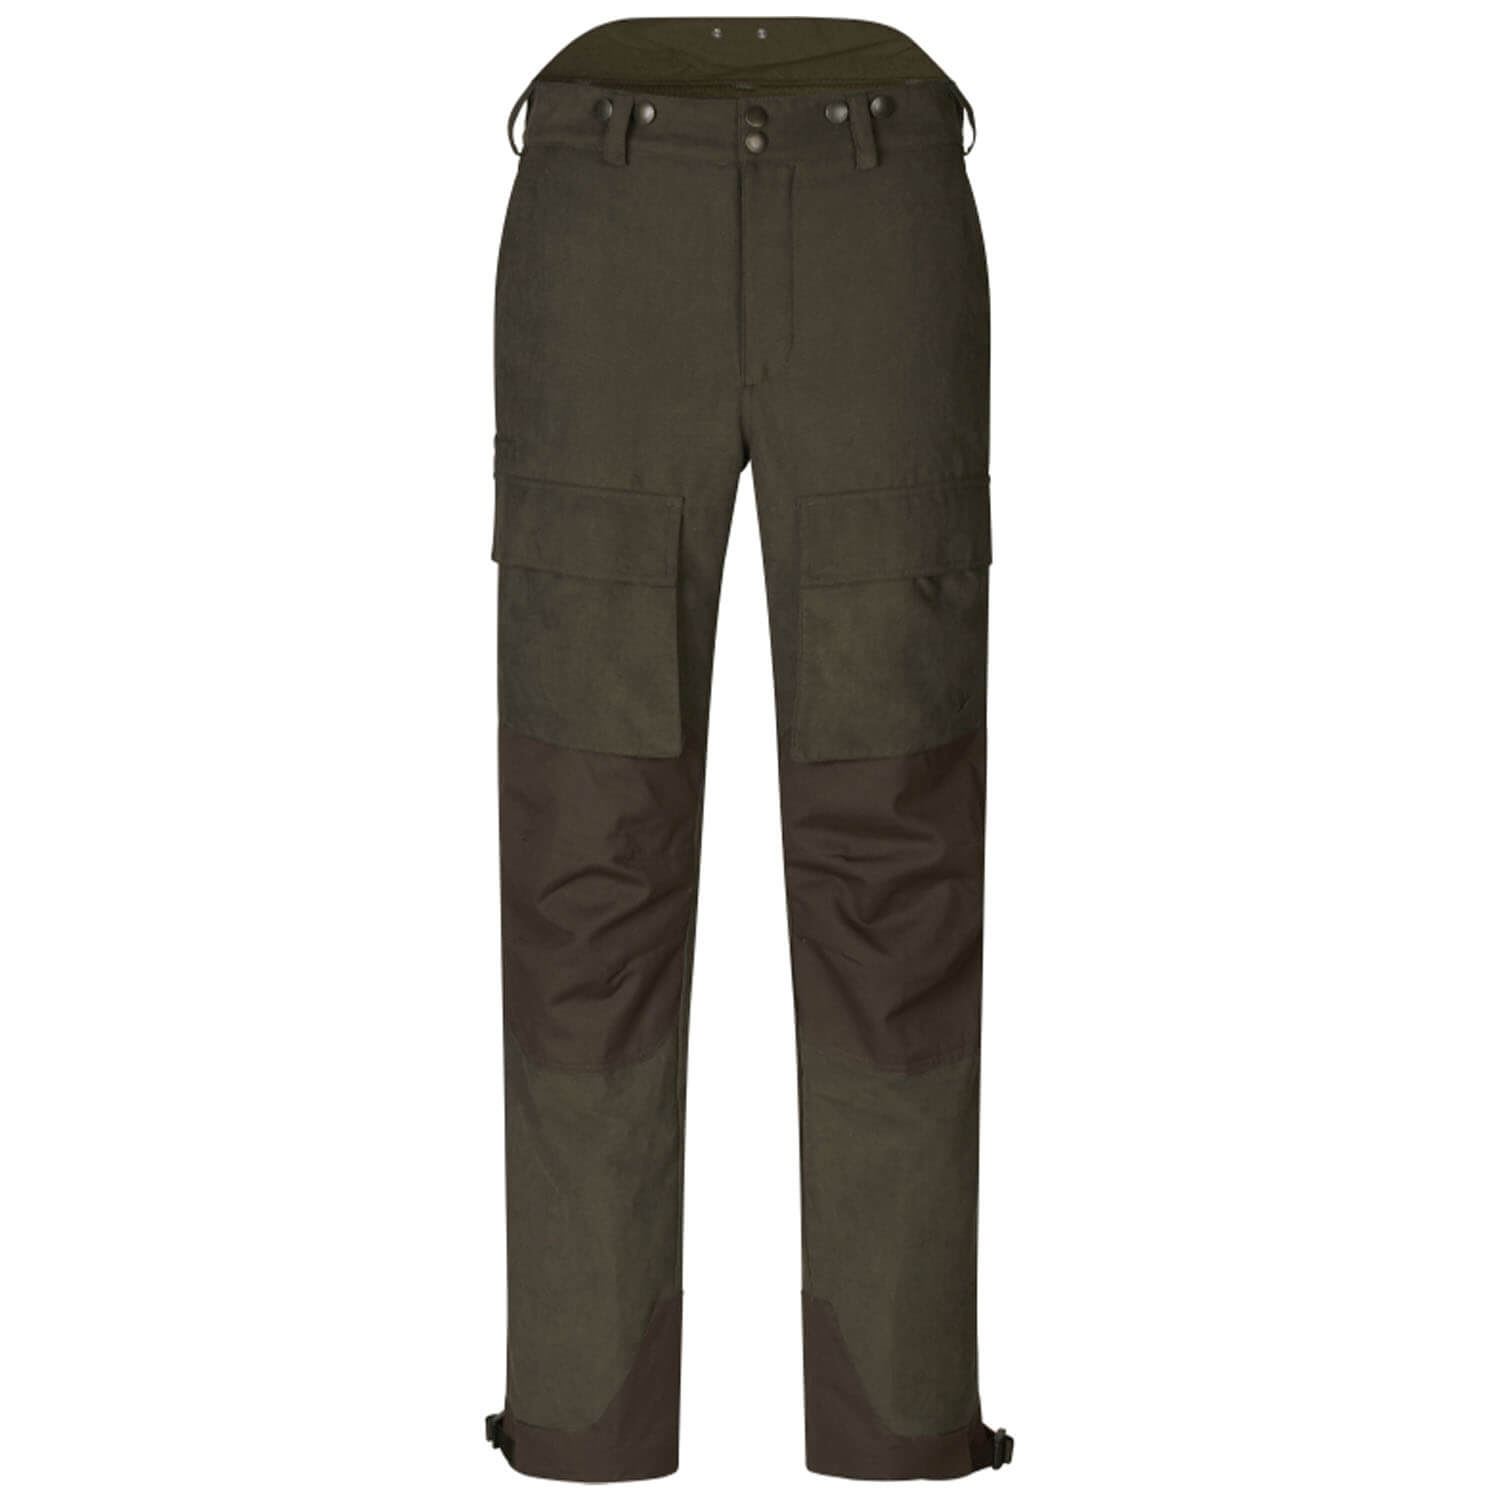 Seeland Winter Trousers Helt II - Winter Hunting Clothing